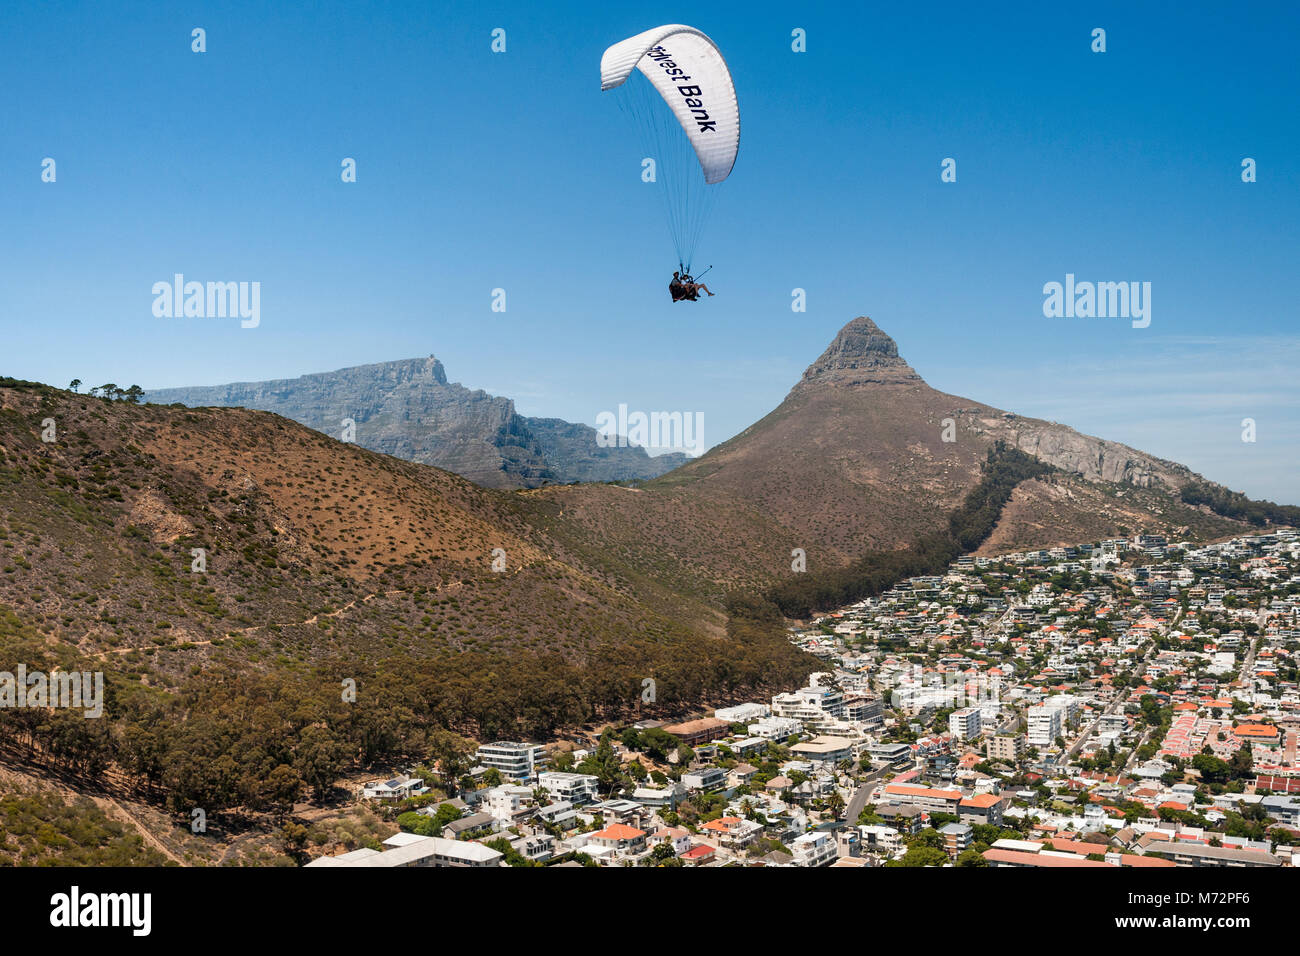 Tandem paraglider flying above Cape Town’s Atlantic seaboard suburb of Fresnaye with Table Mountain and Lion’s Head in the background. Stock Photo